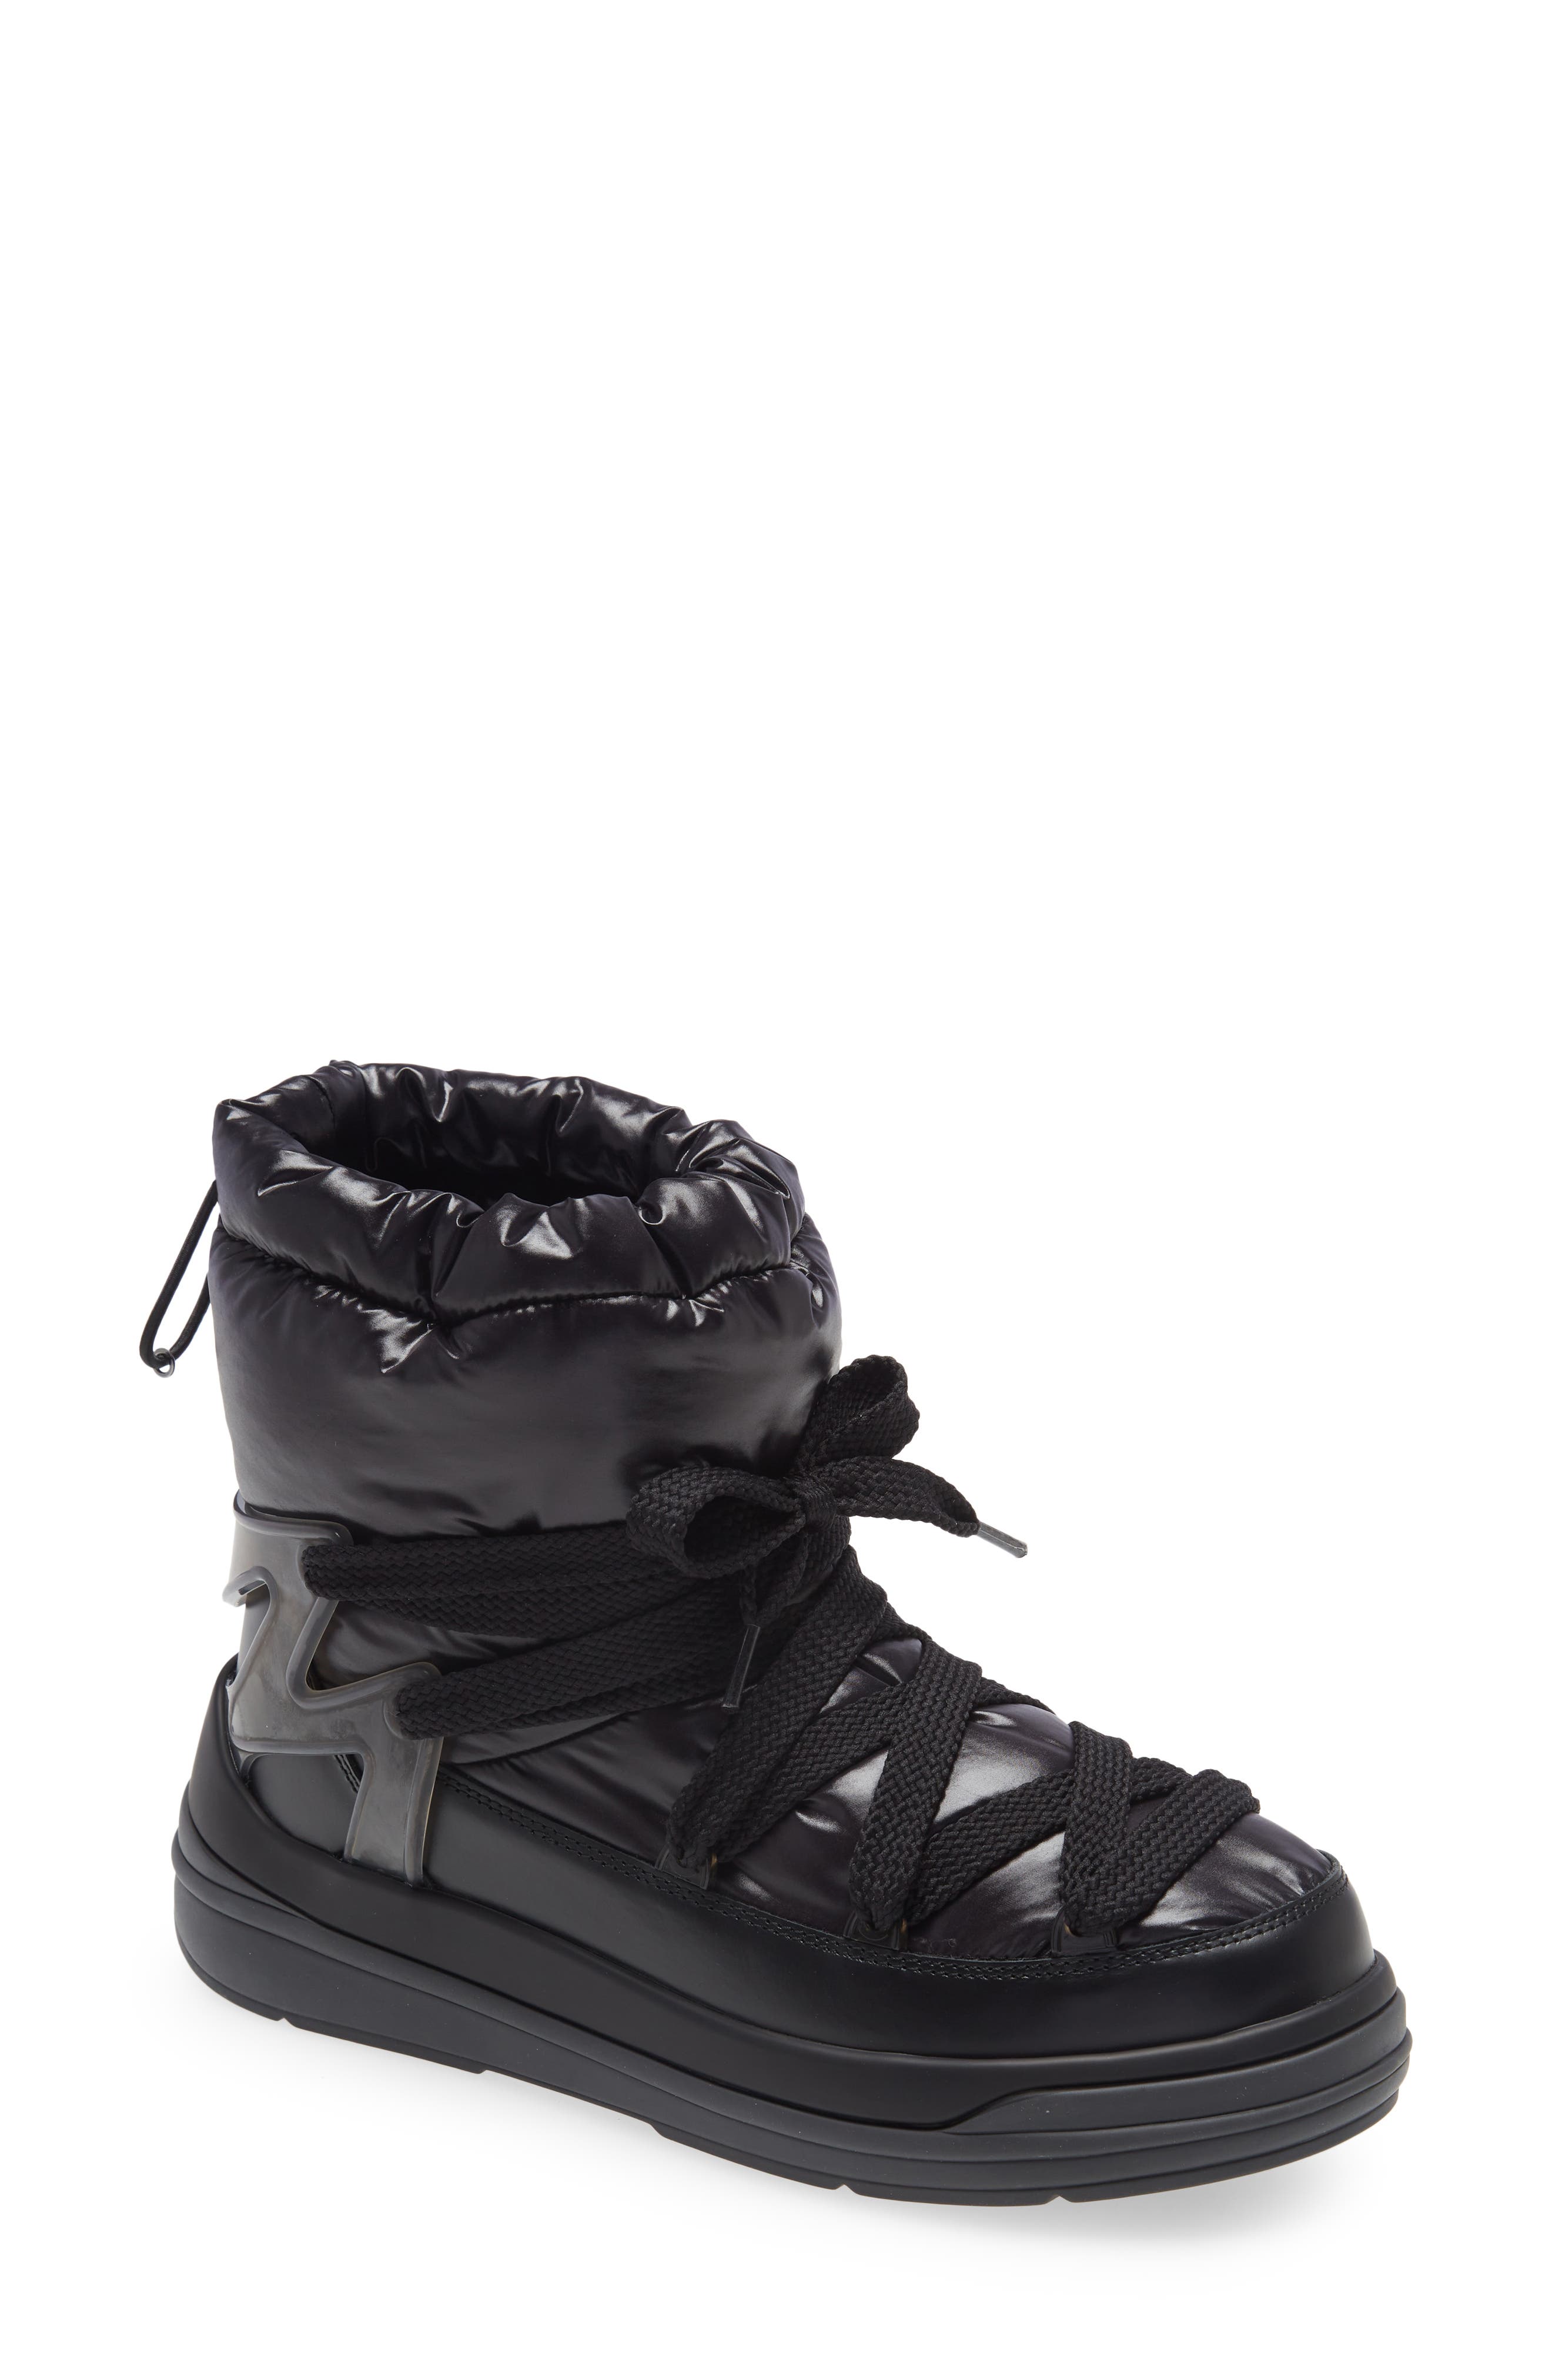 Moncler Insolux Waterproof Snow Boot in Black at Nordstrom, Size 6Us